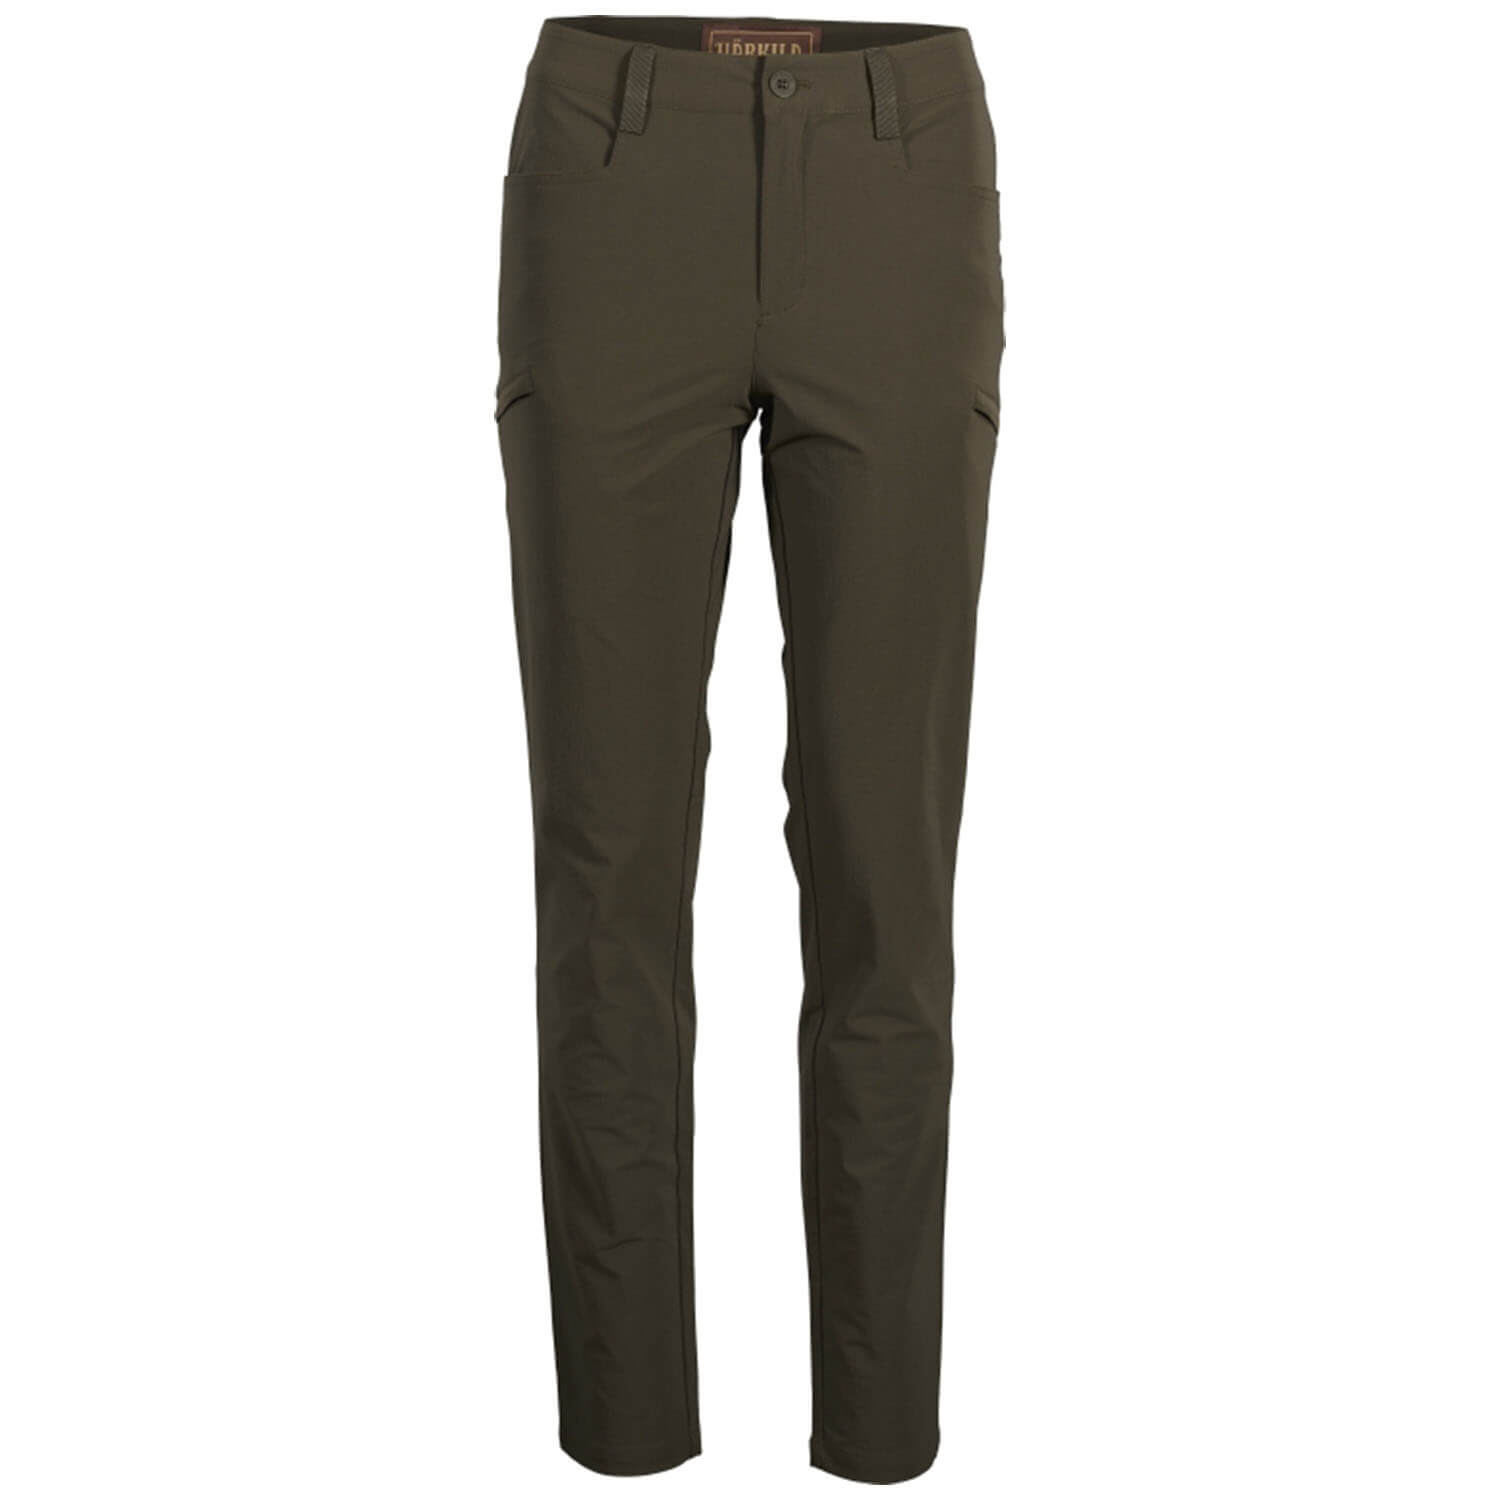 Härkila womens hunting pants trail (willow green) - Insect Protection